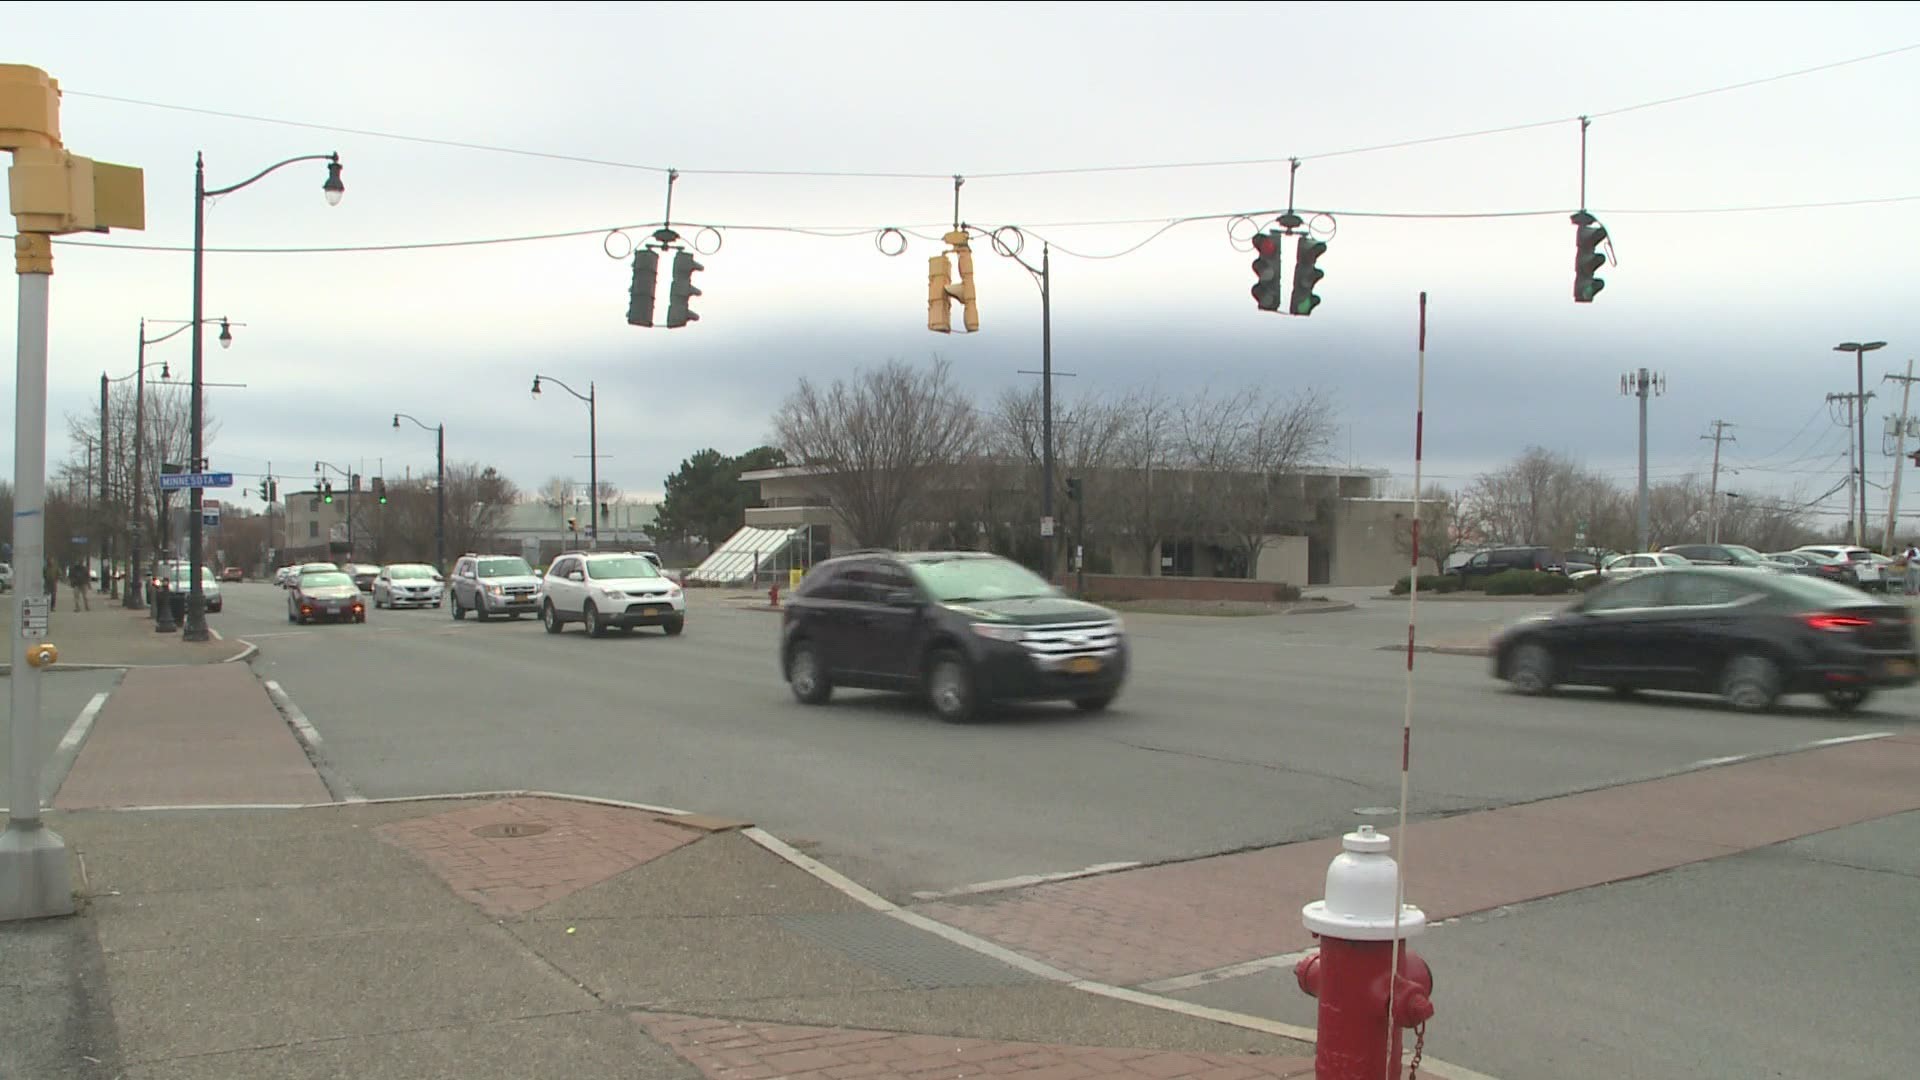 Police say a Dodge Charger was traveling north on Main Street when it hit the woman as she was crossing the street.